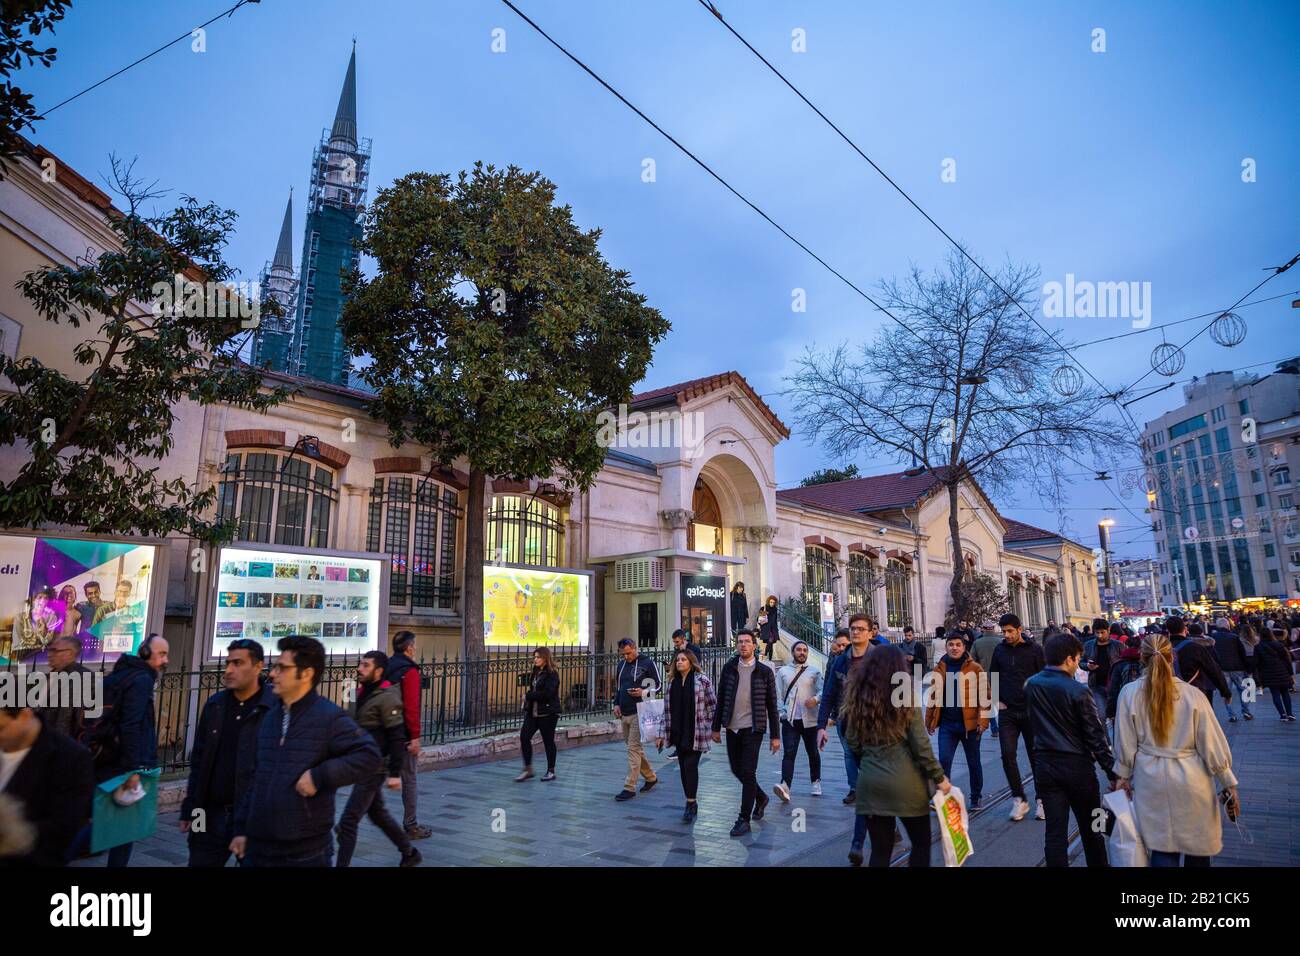 Istiklal street view of French Cultural Center and French Consulate General buildings located near Taksim square in Istanbul, Turkey. Stock Photo